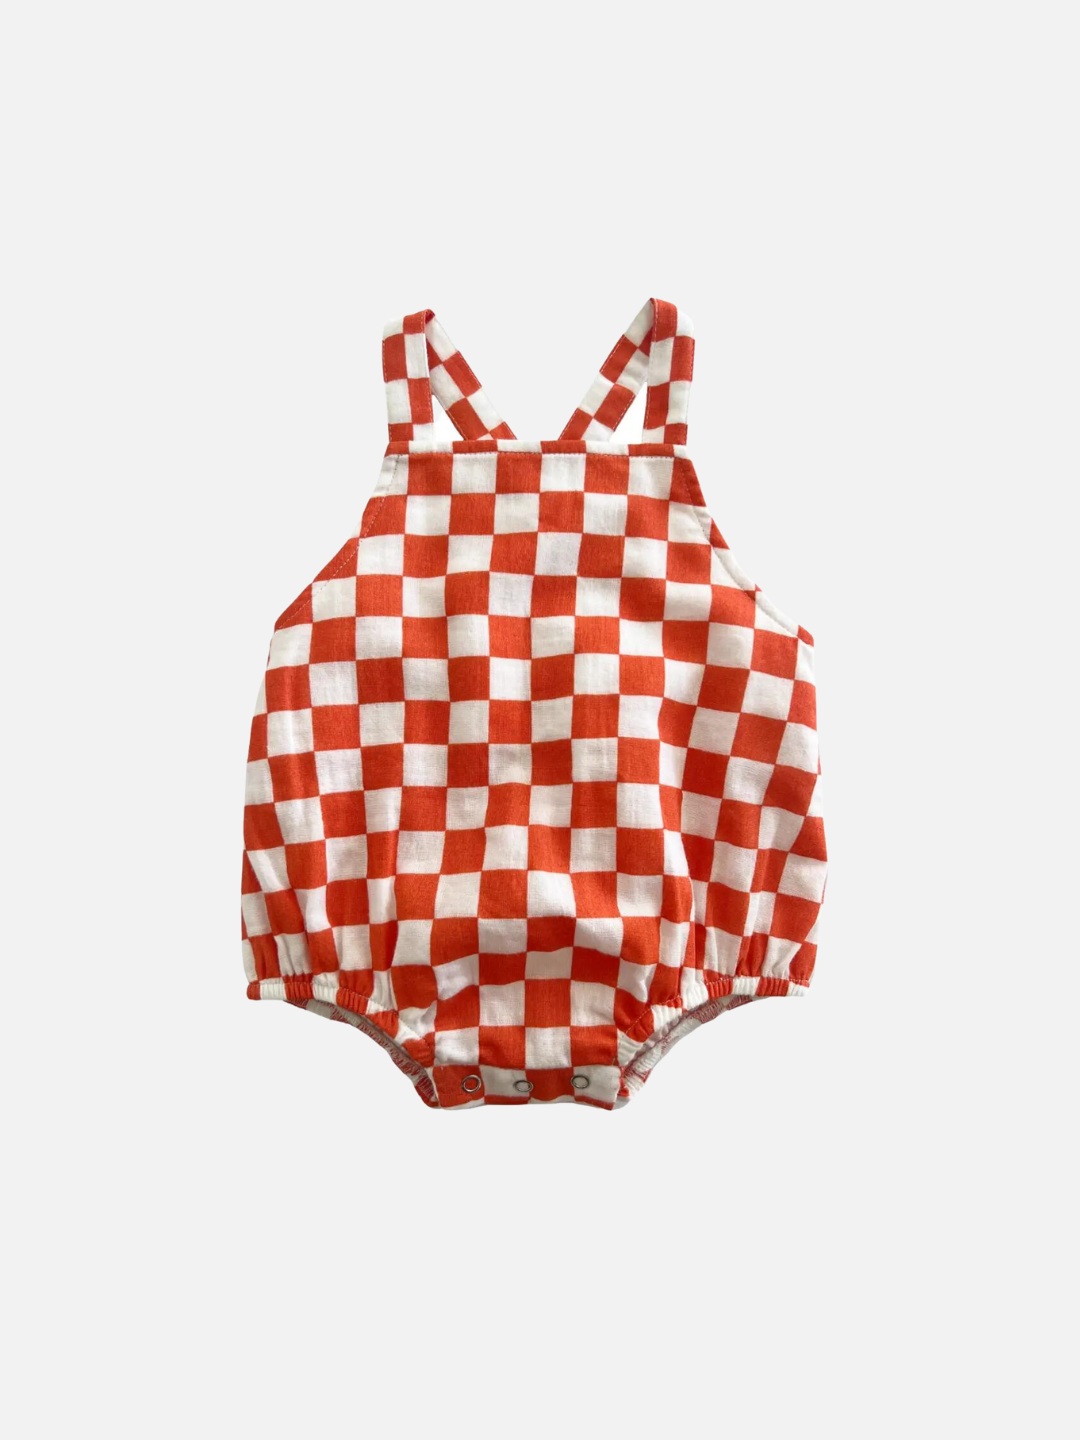 Tangerine | A tangerine orange and white checkerboard kids' sunsuit, front view